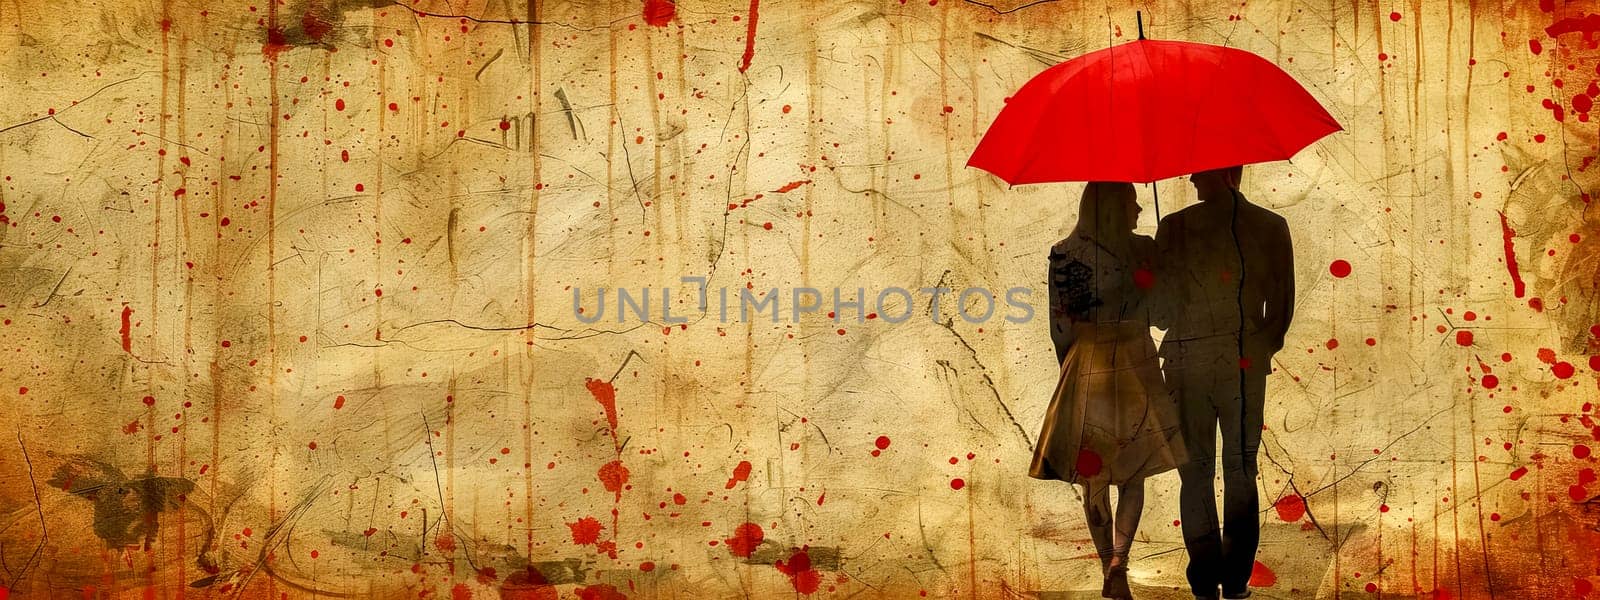 Mysterious couple under red umbrella on splattered background by Edophoto